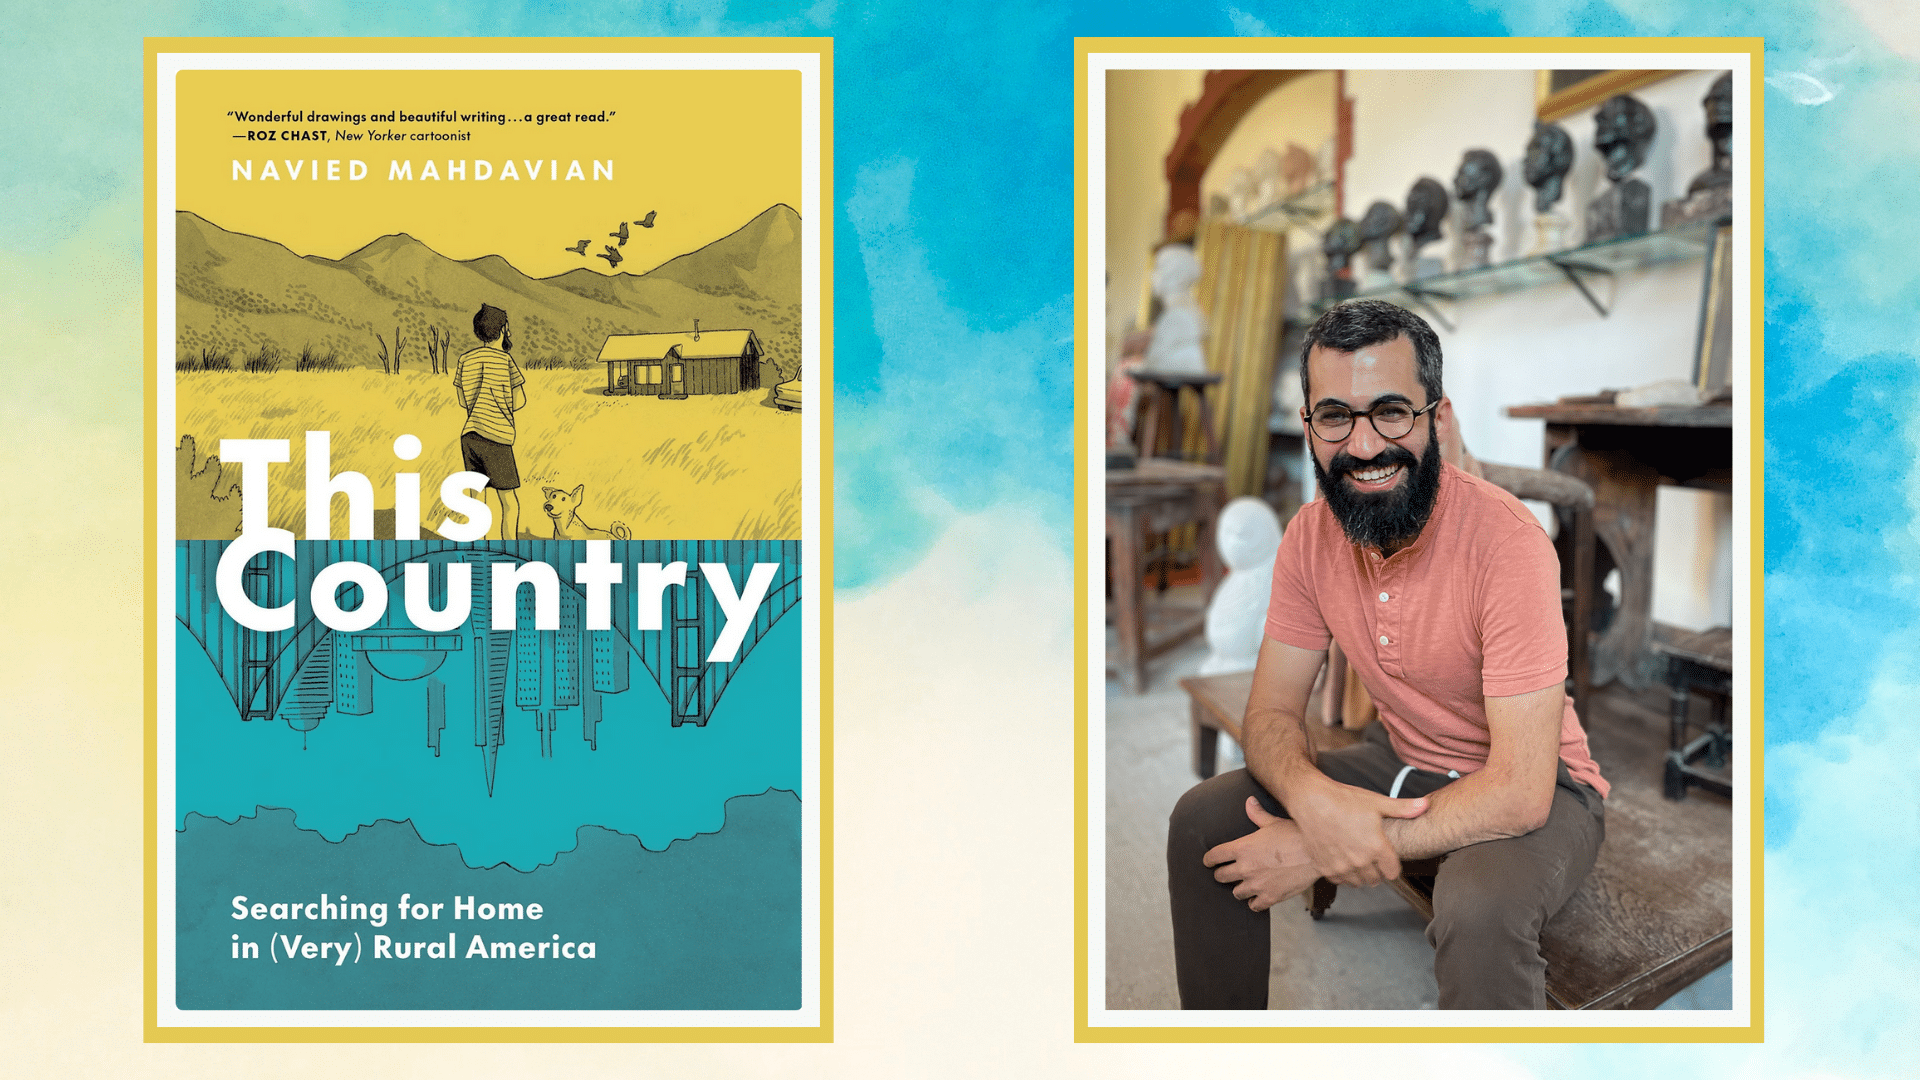 The cover for This Country sits on the left. The top half of the book is yellow and shows an illustration of Navied walking towards a rural home. The bottom half is blue with an illustration of a skyline. On the right is Navied's author photo. He has short dark hair and a beard. He has glasses and is smiling broadly. He sits in front of a wall of busts.